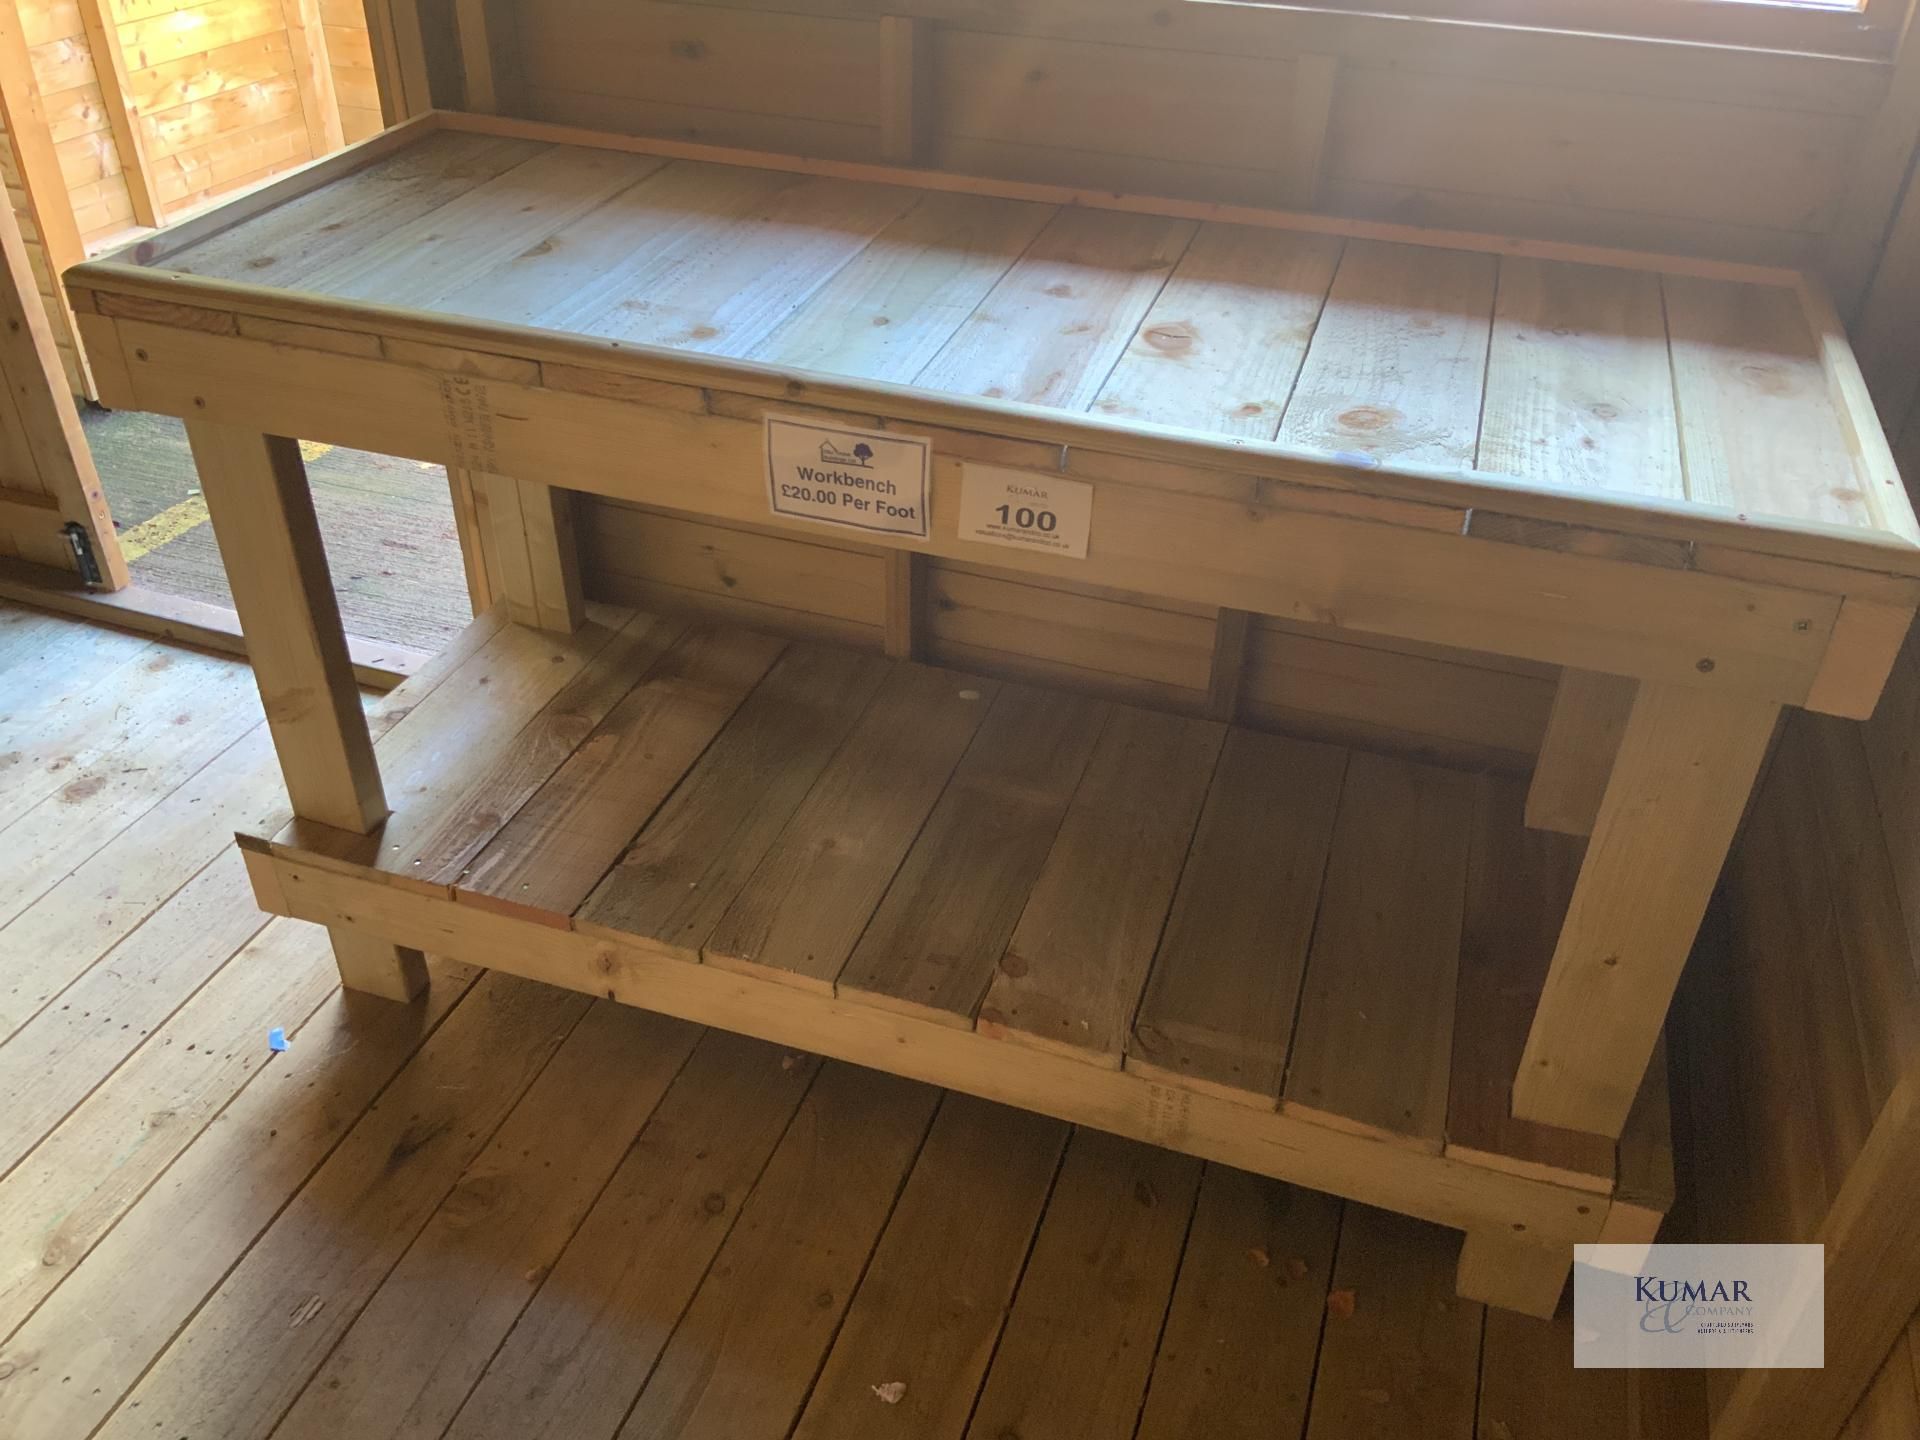 Wooden Work Bench Sizes, 153cm x 60cm x 90cm - Lot Location in Lot 99 - Image 4 of 7